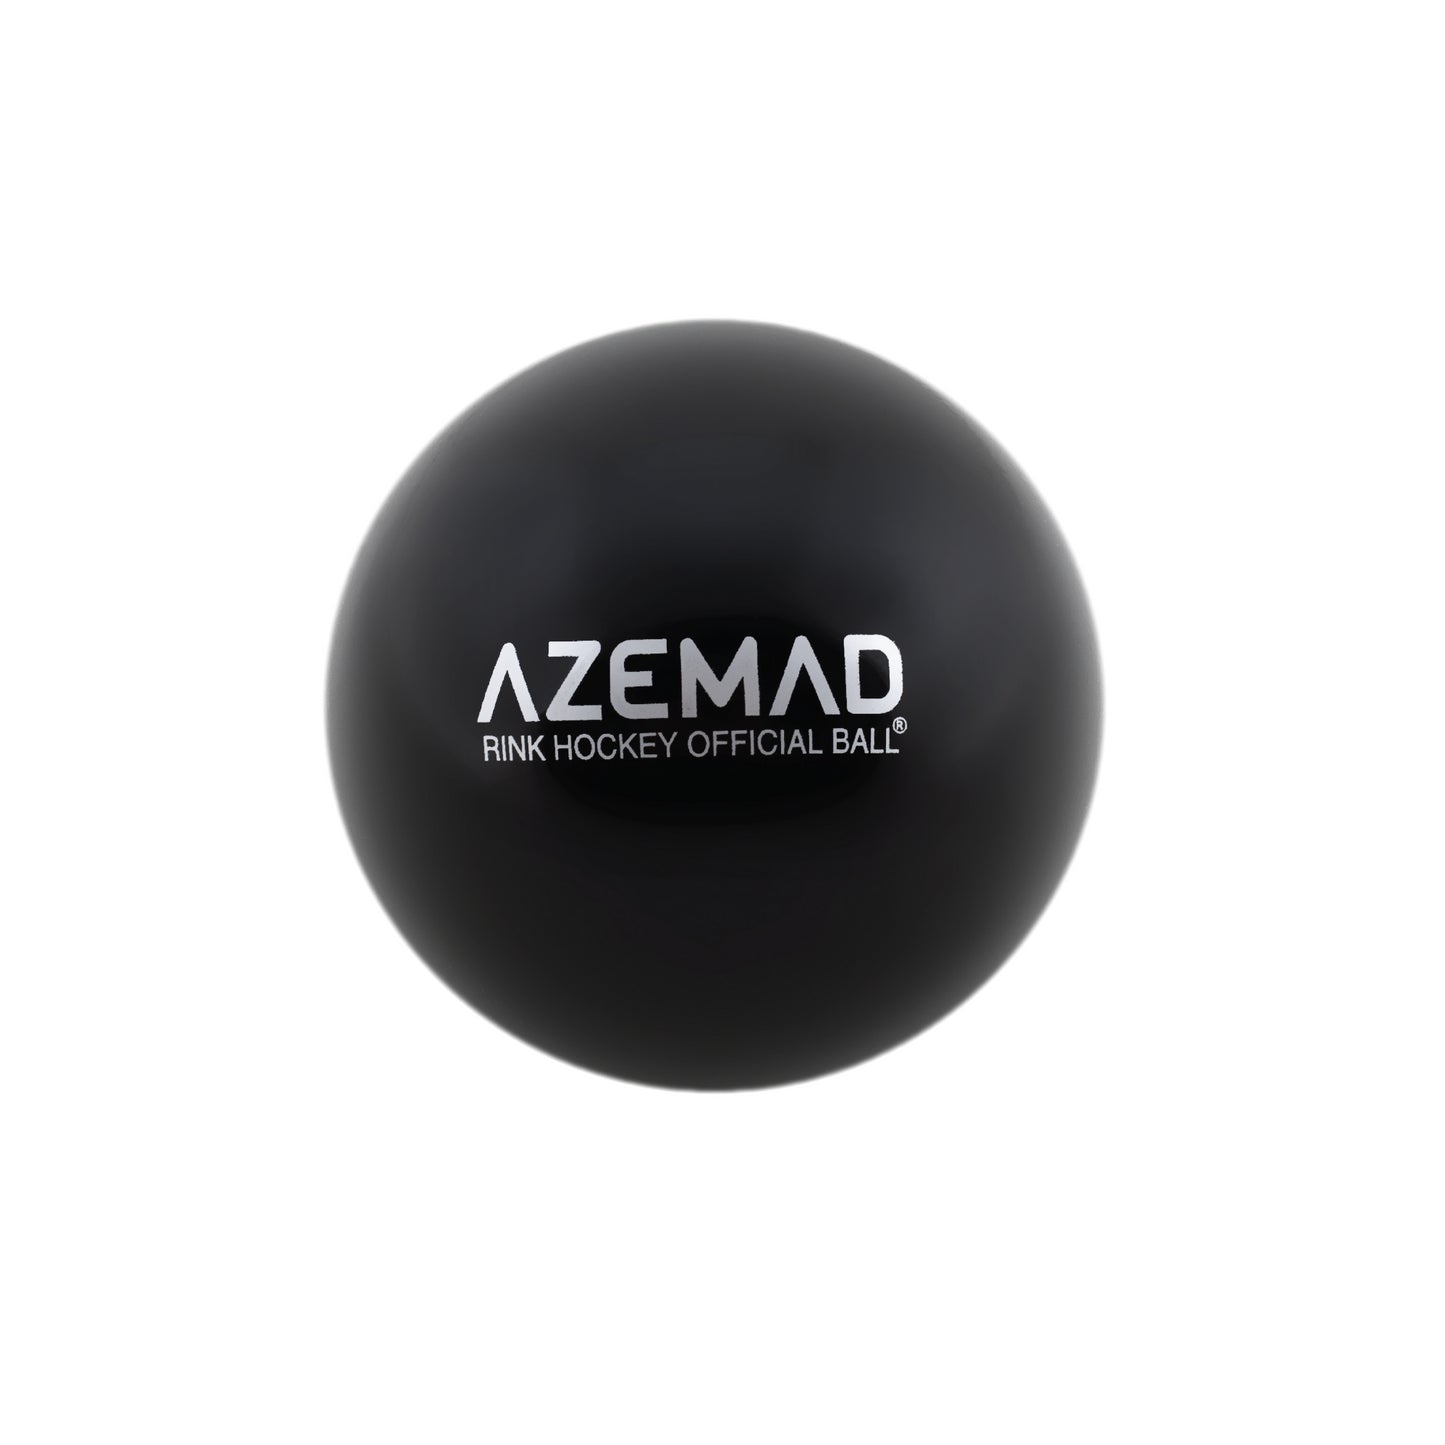 AZEMAD Official Portuguese Ball